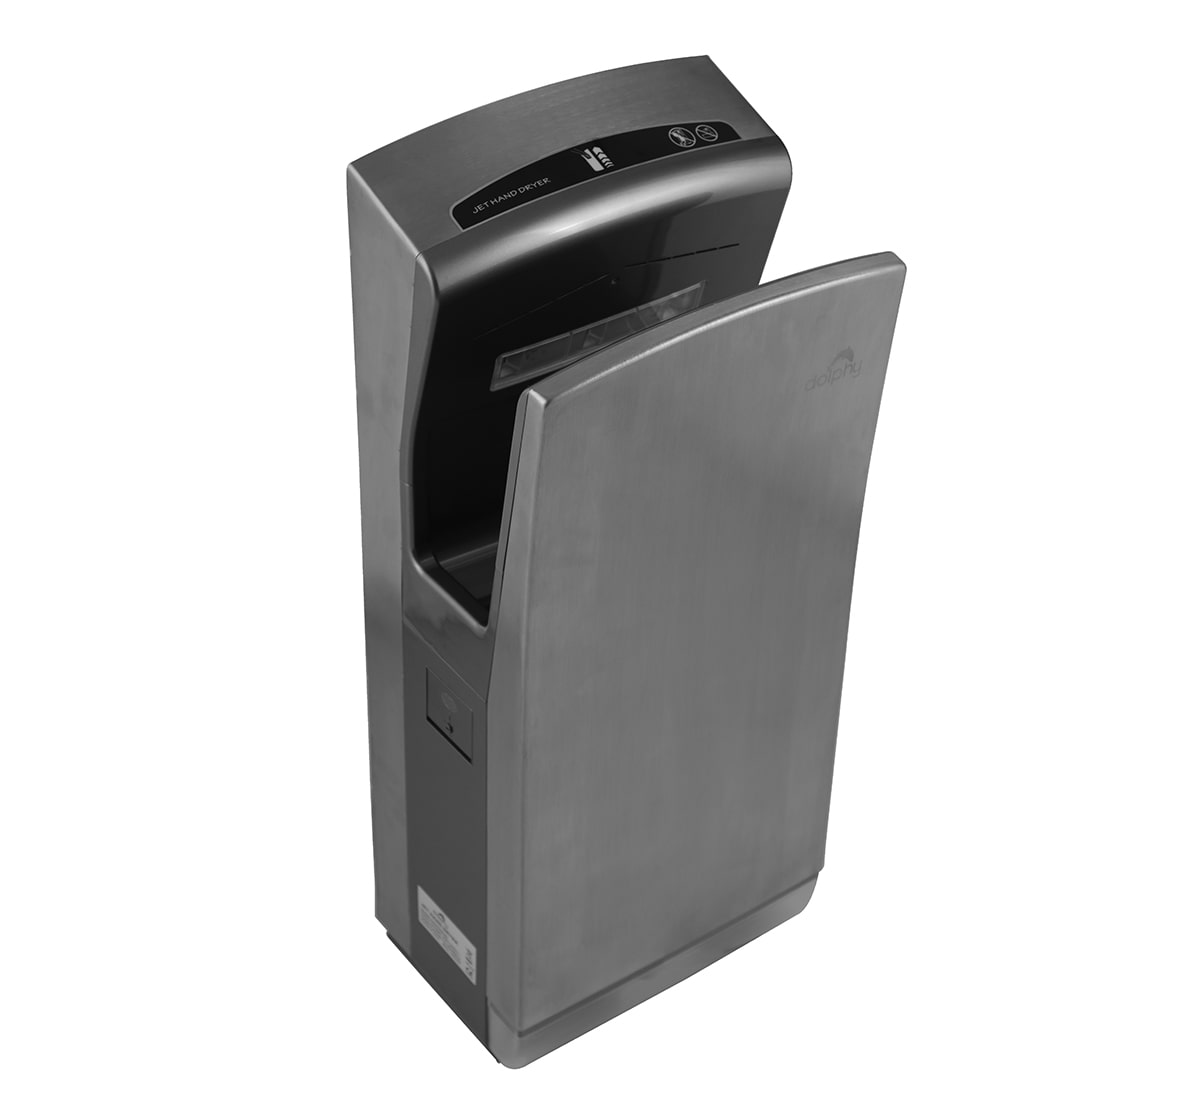 Stainless Steel hand dryer with brush motor